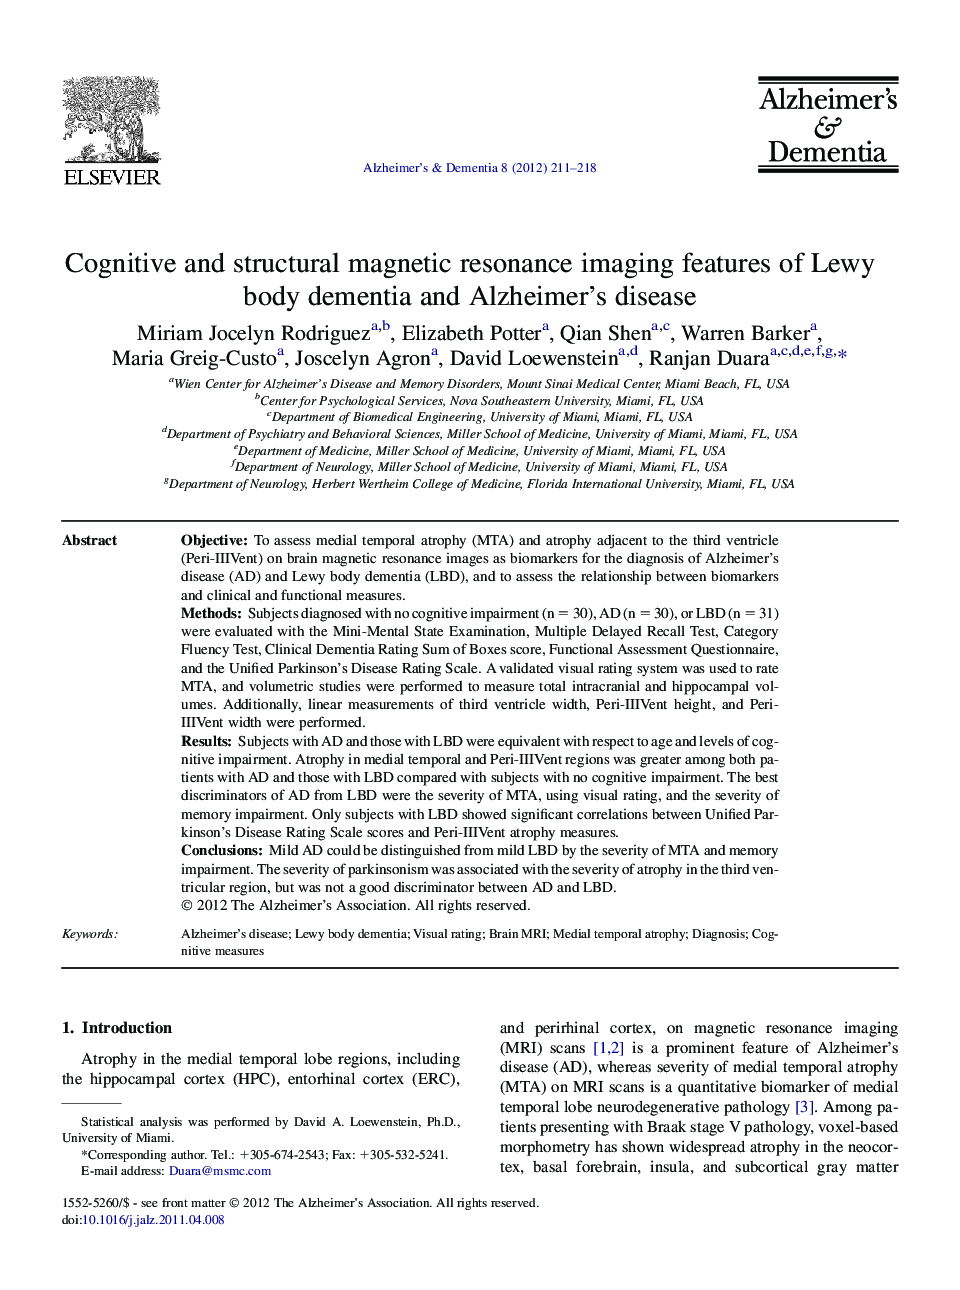 Featured ArticleCognitive and structural magnetic resonance imaging features of Lewy body dementia and Alzheimer's disease